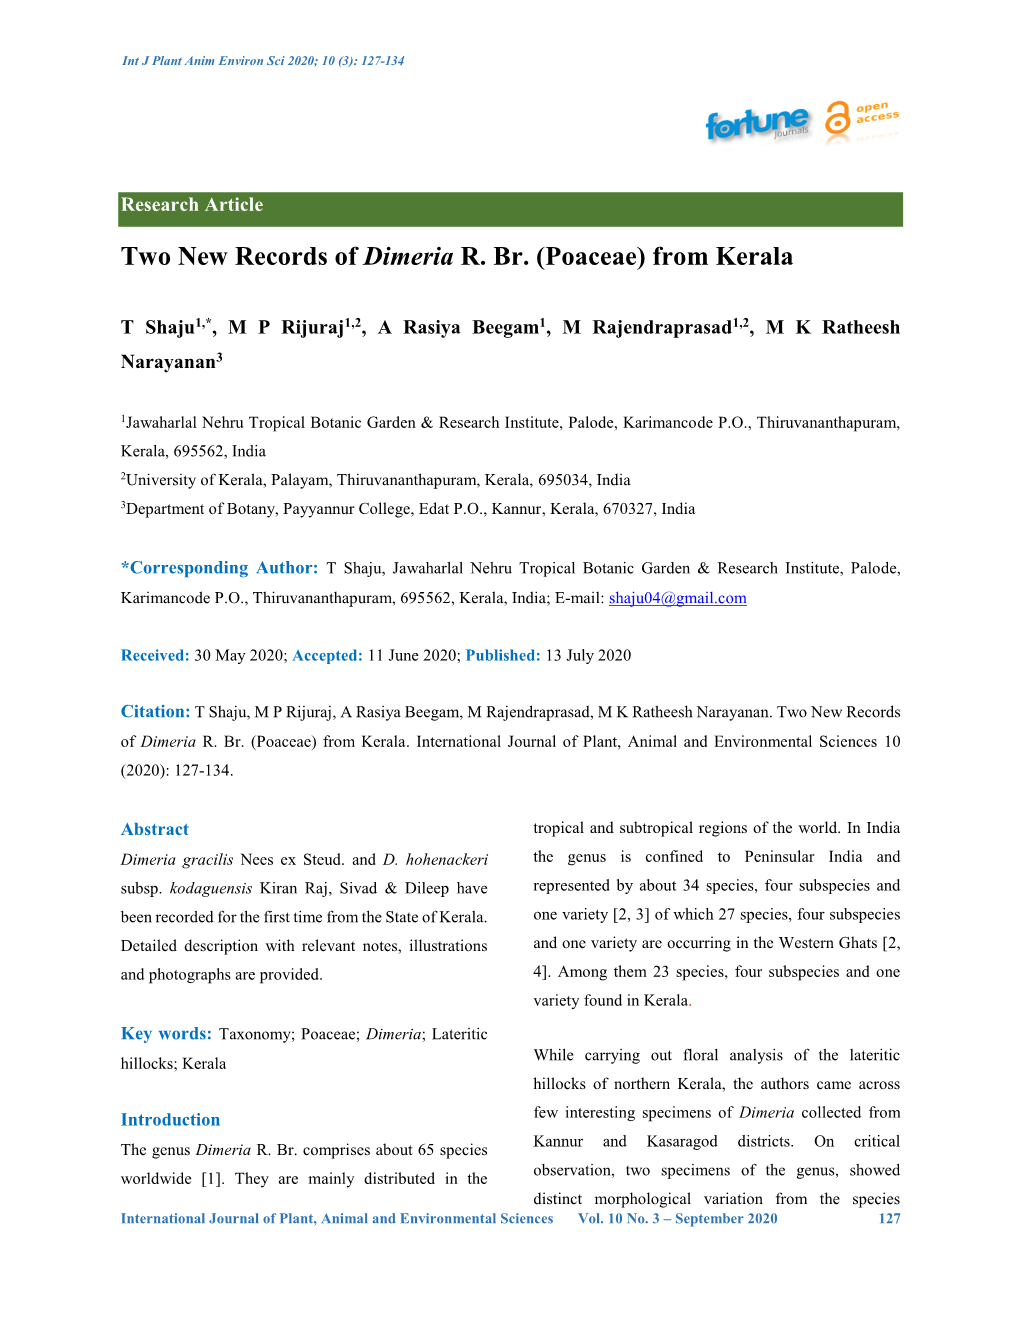 Two New Records of Dimeria R. Br. (Poaceae) from Kerala